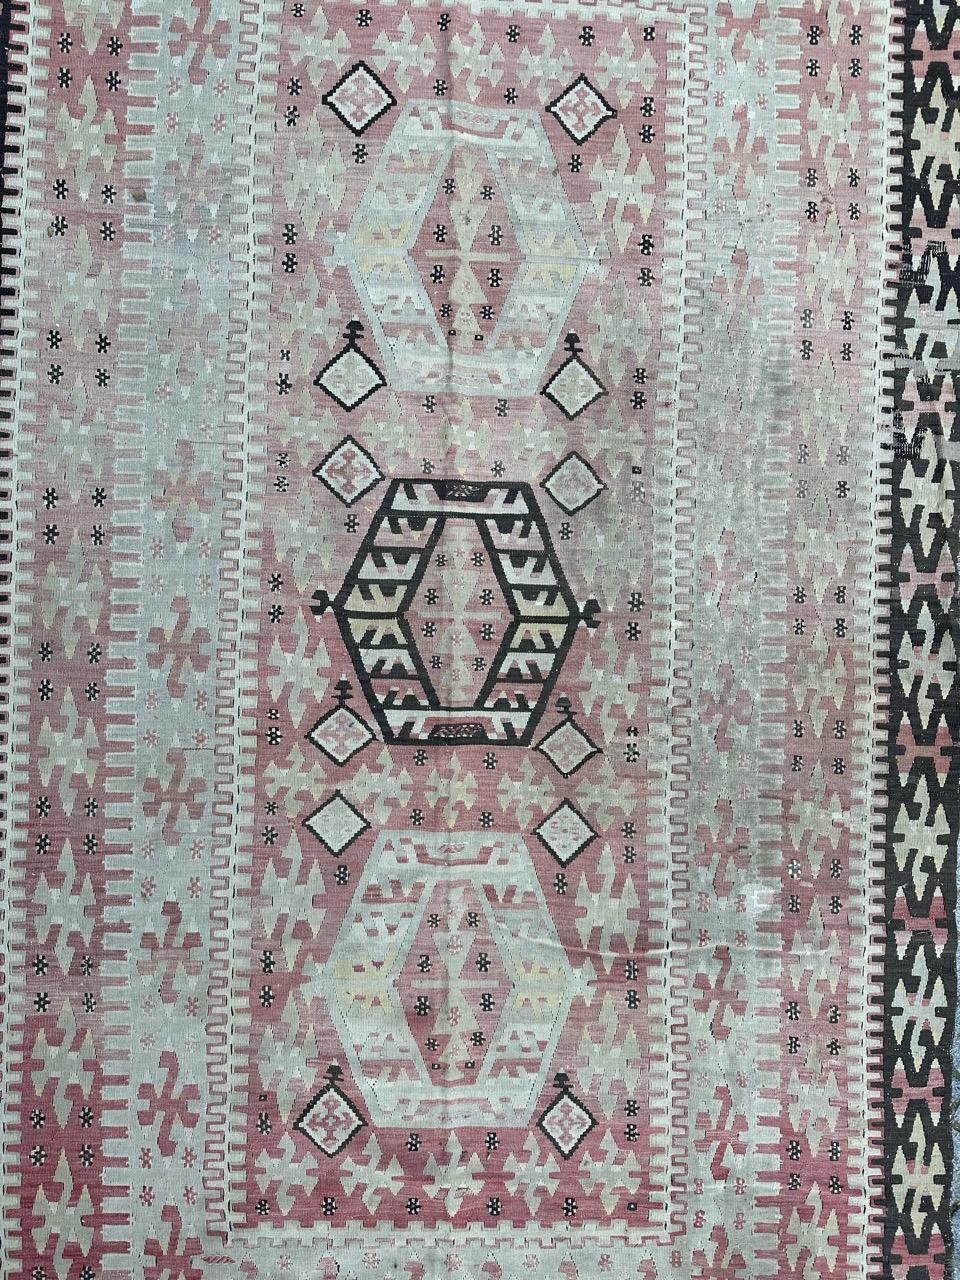 Beautiful mid-century Turkish Kilim featuring intricate geometrical designs and light colors. This antique Anatolian Kilim is finely handwoven with wool, showcasing elegant patterns in shades of  pink, white green and black. Enhance your space with